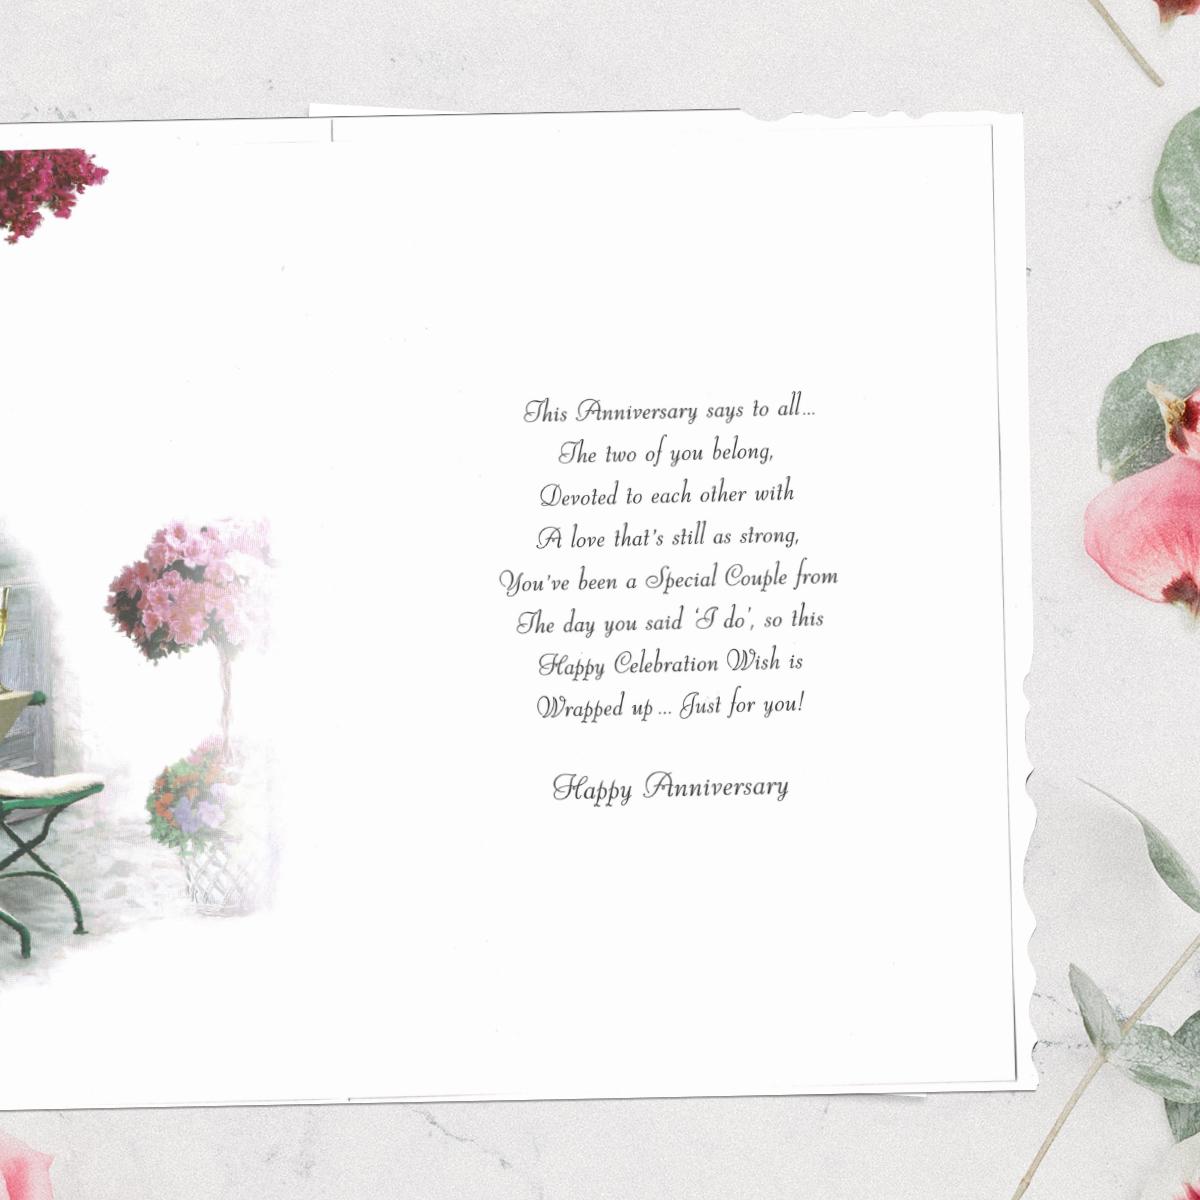 Inside Image Of Anniversary Card Showing Layout And Printed Text